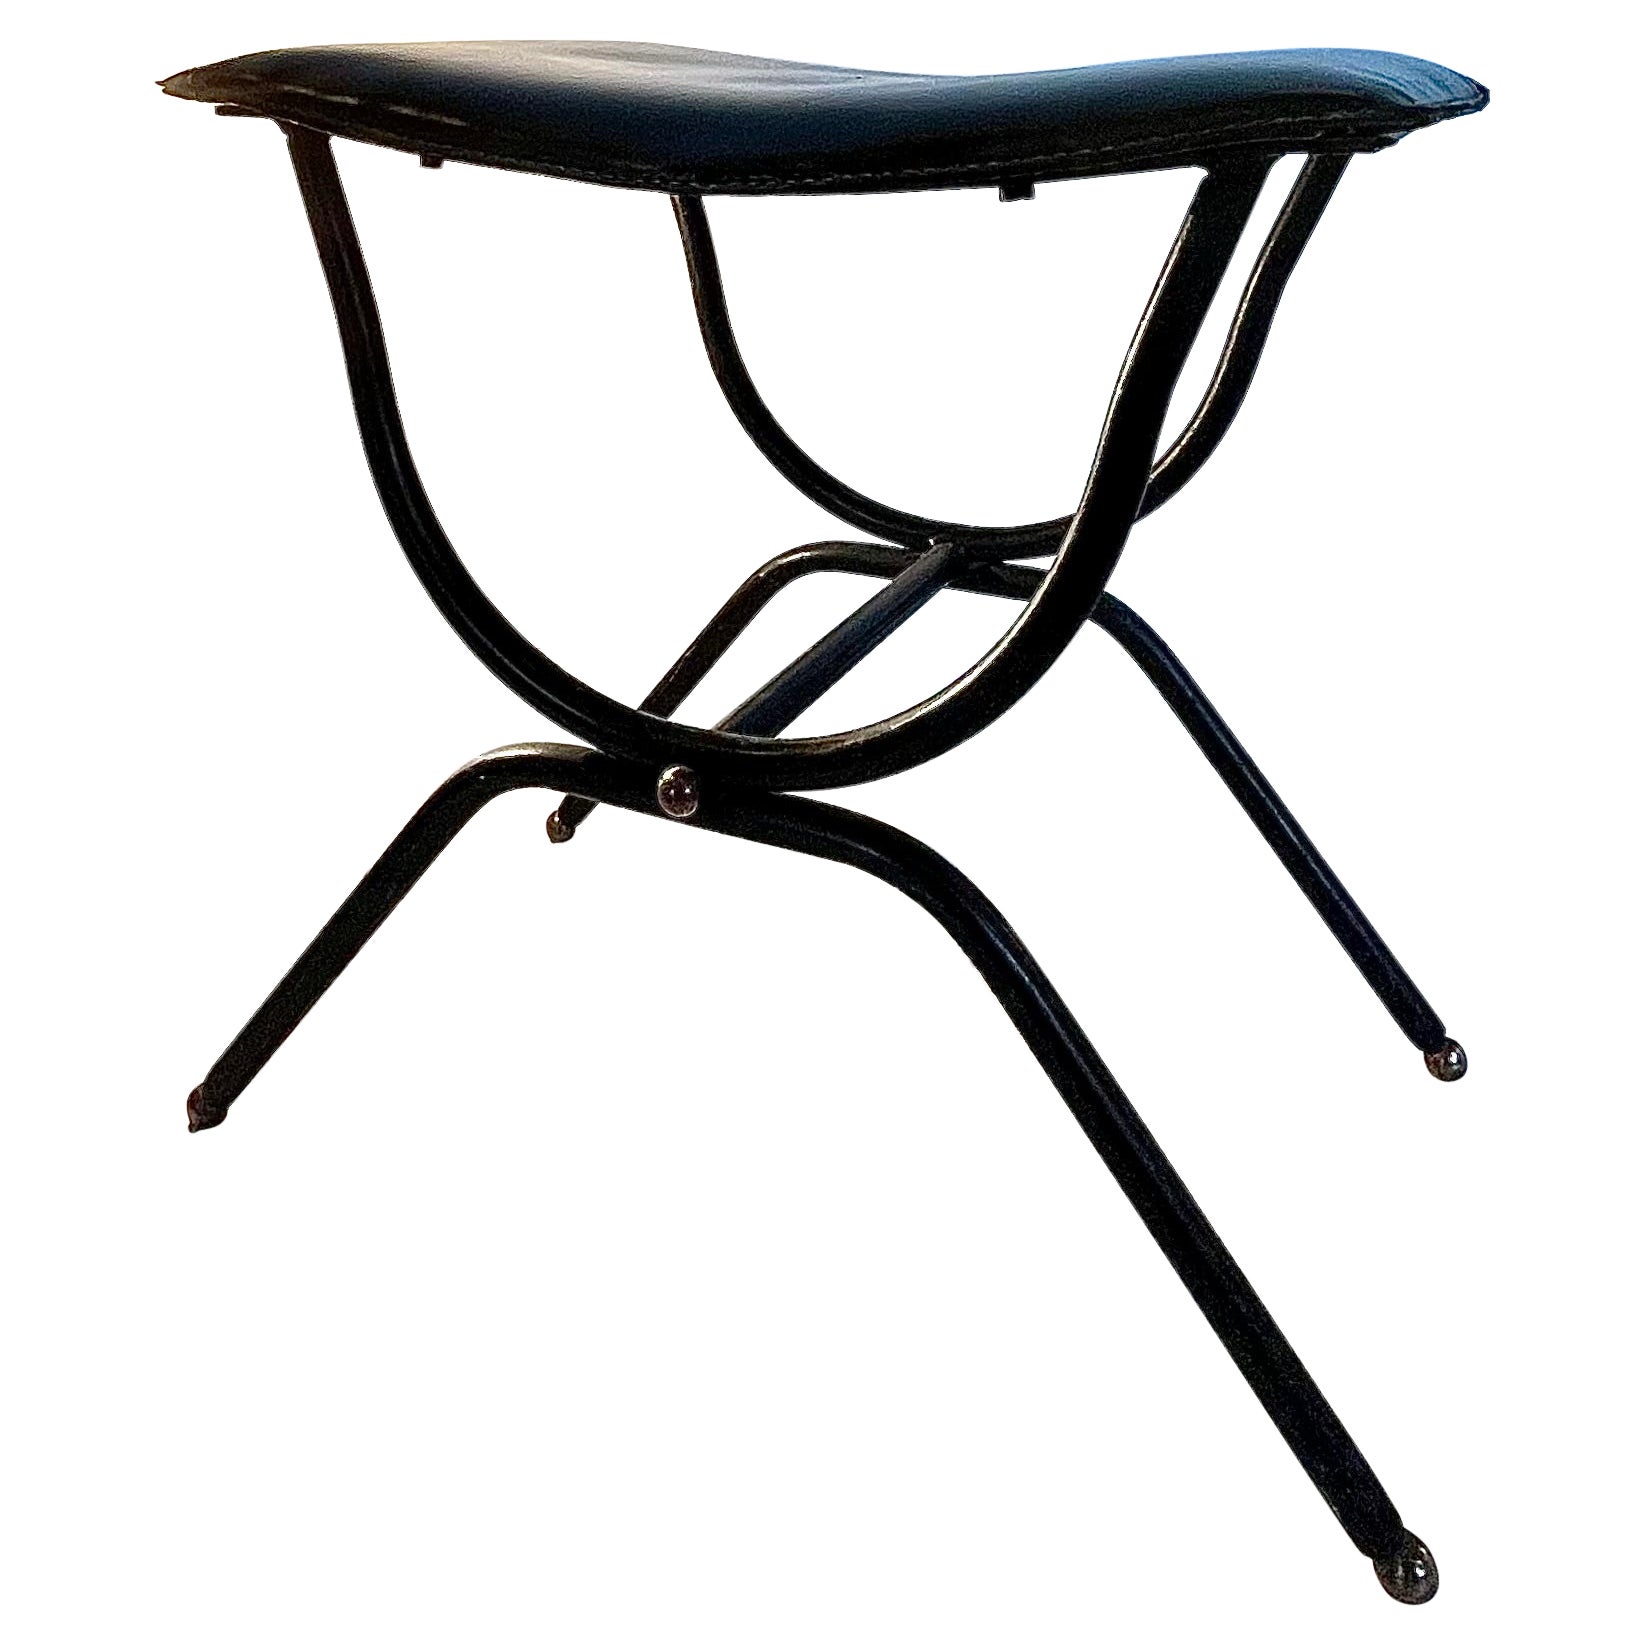 Jacques Adnet : Black leather stool, circa 1955